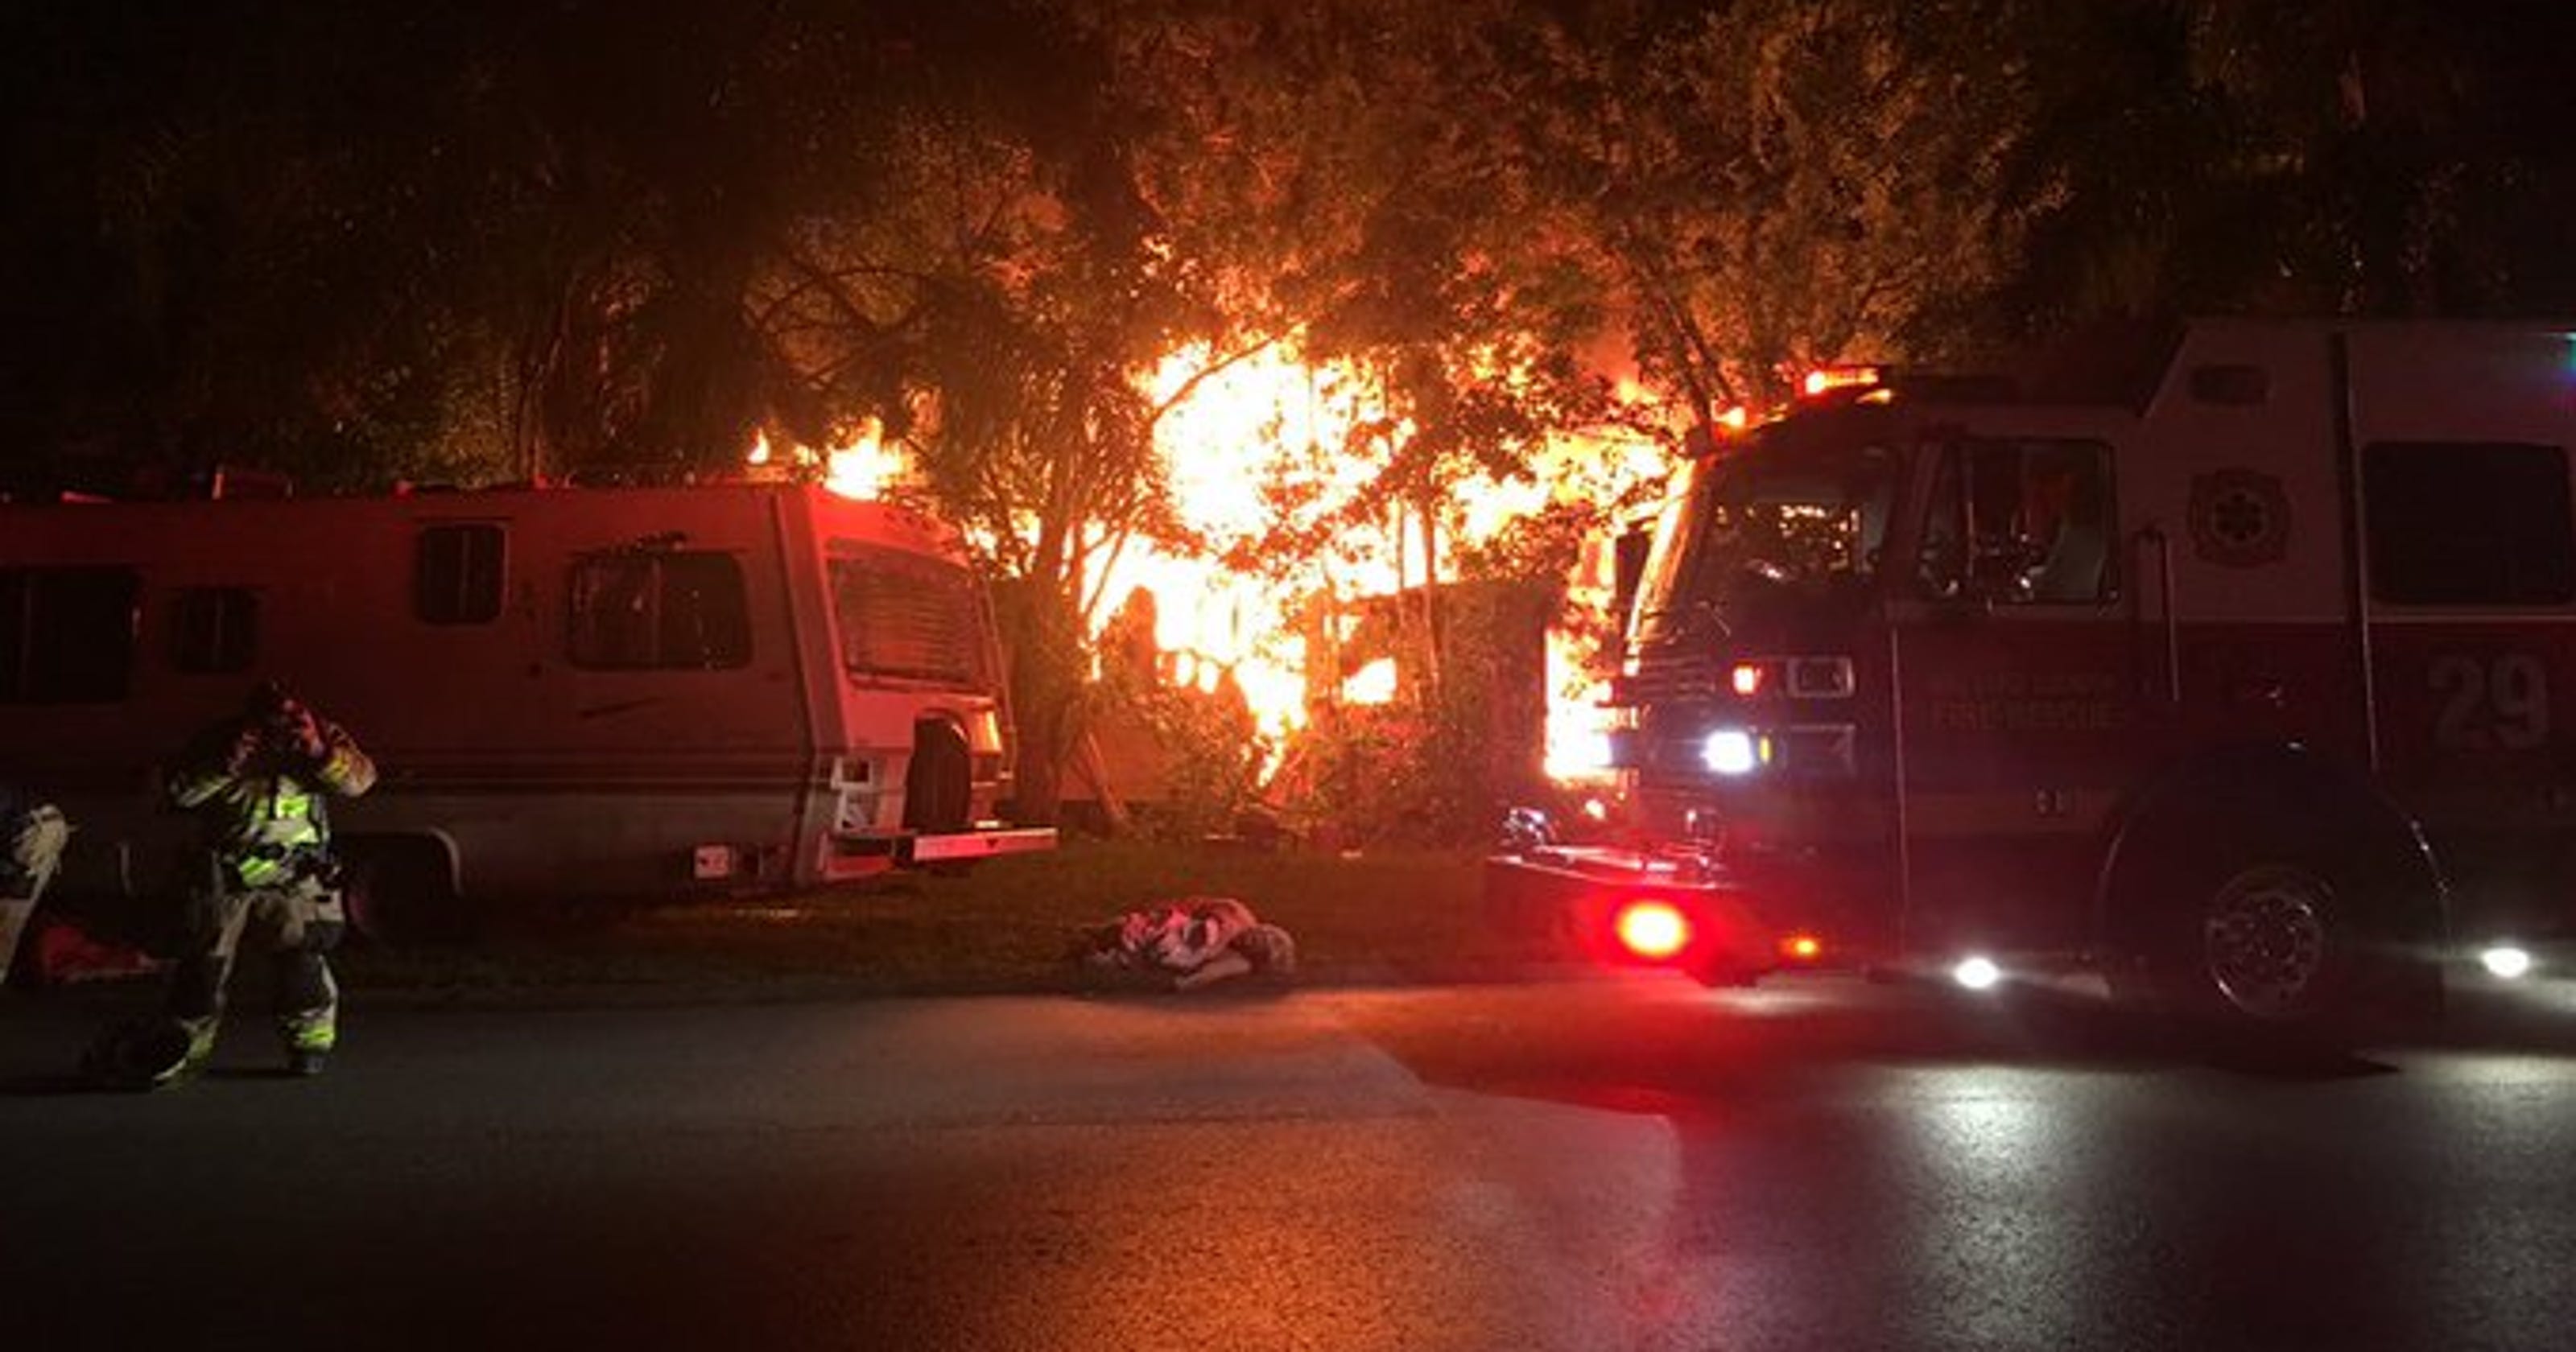 Firefighters respond to Canaveral Groves structure fire